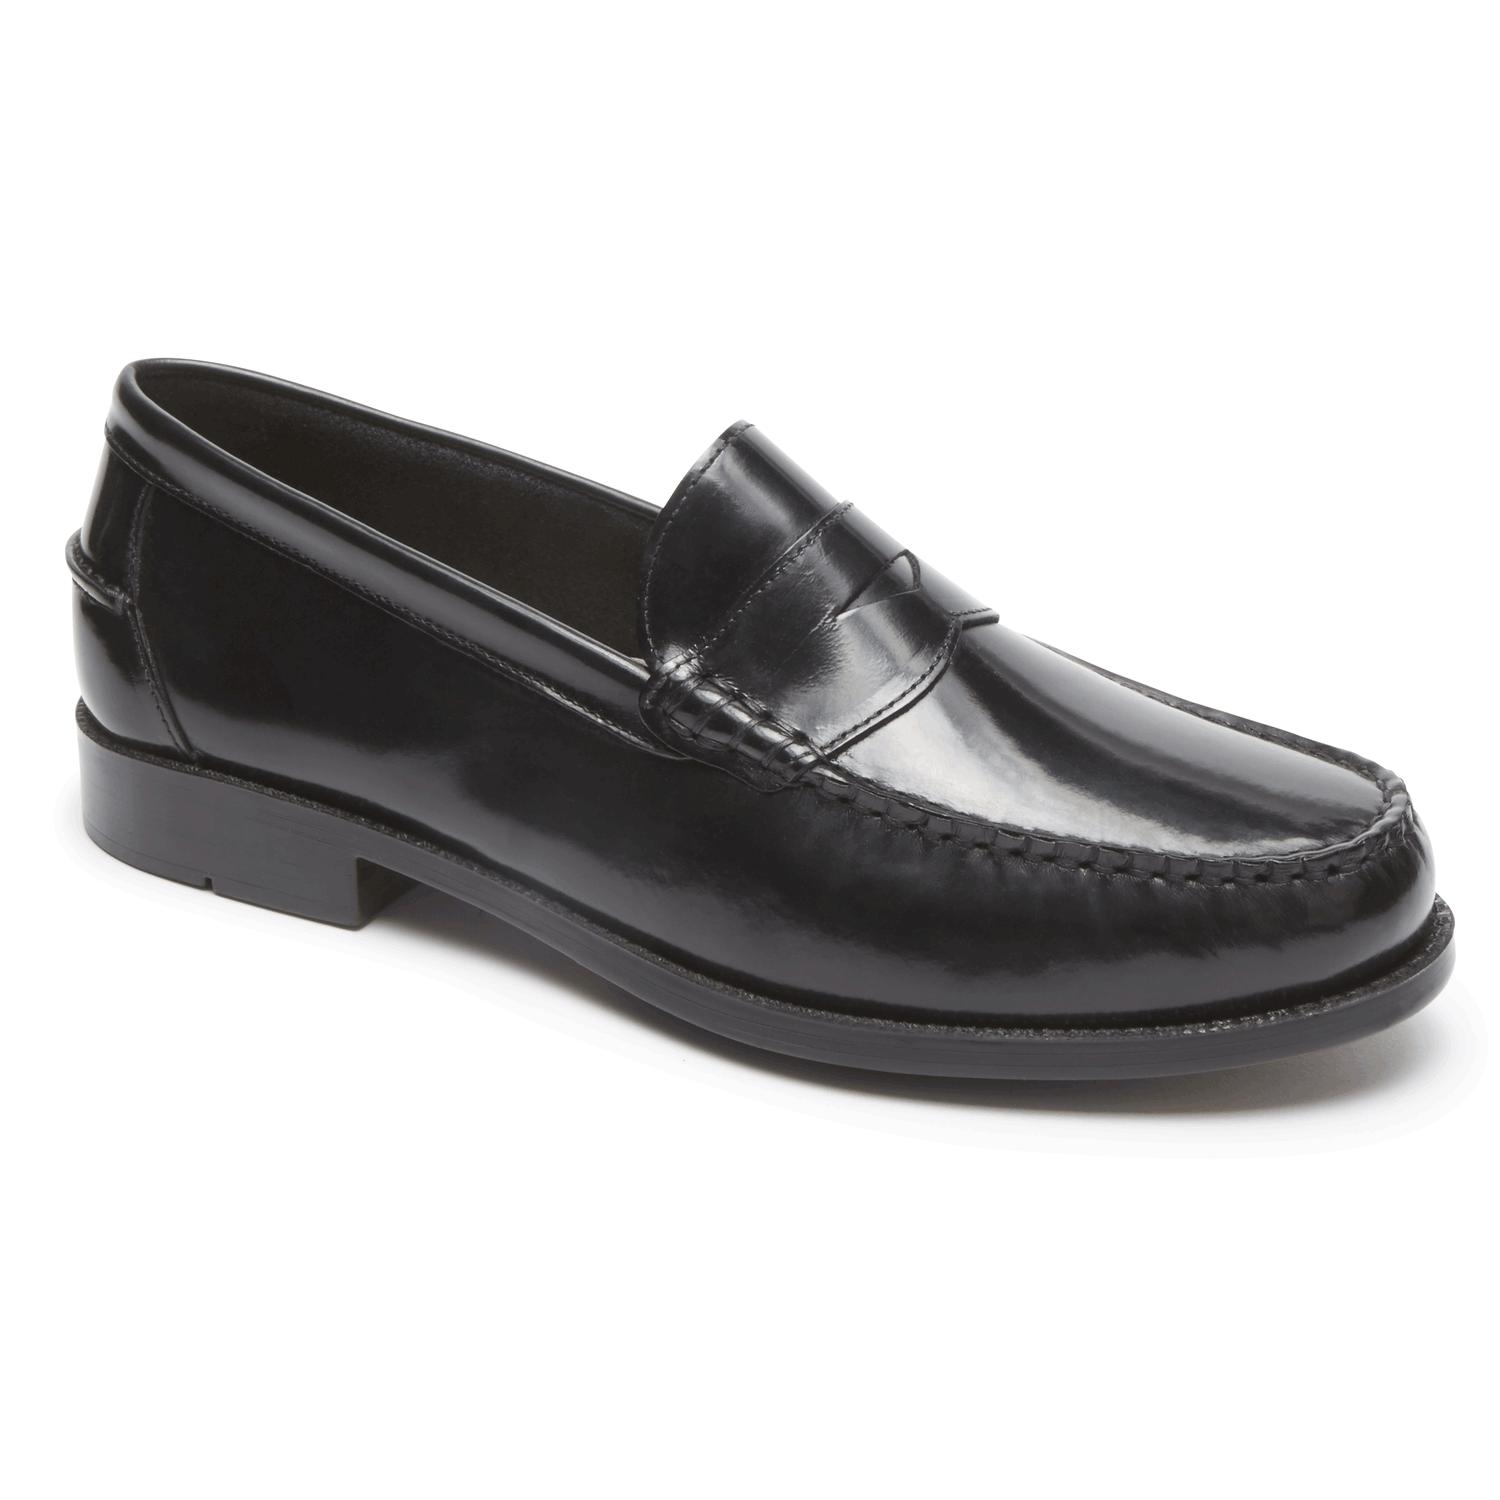 Rockport Leather Everyday Business Penny Loafer in Black for Men - Lyst